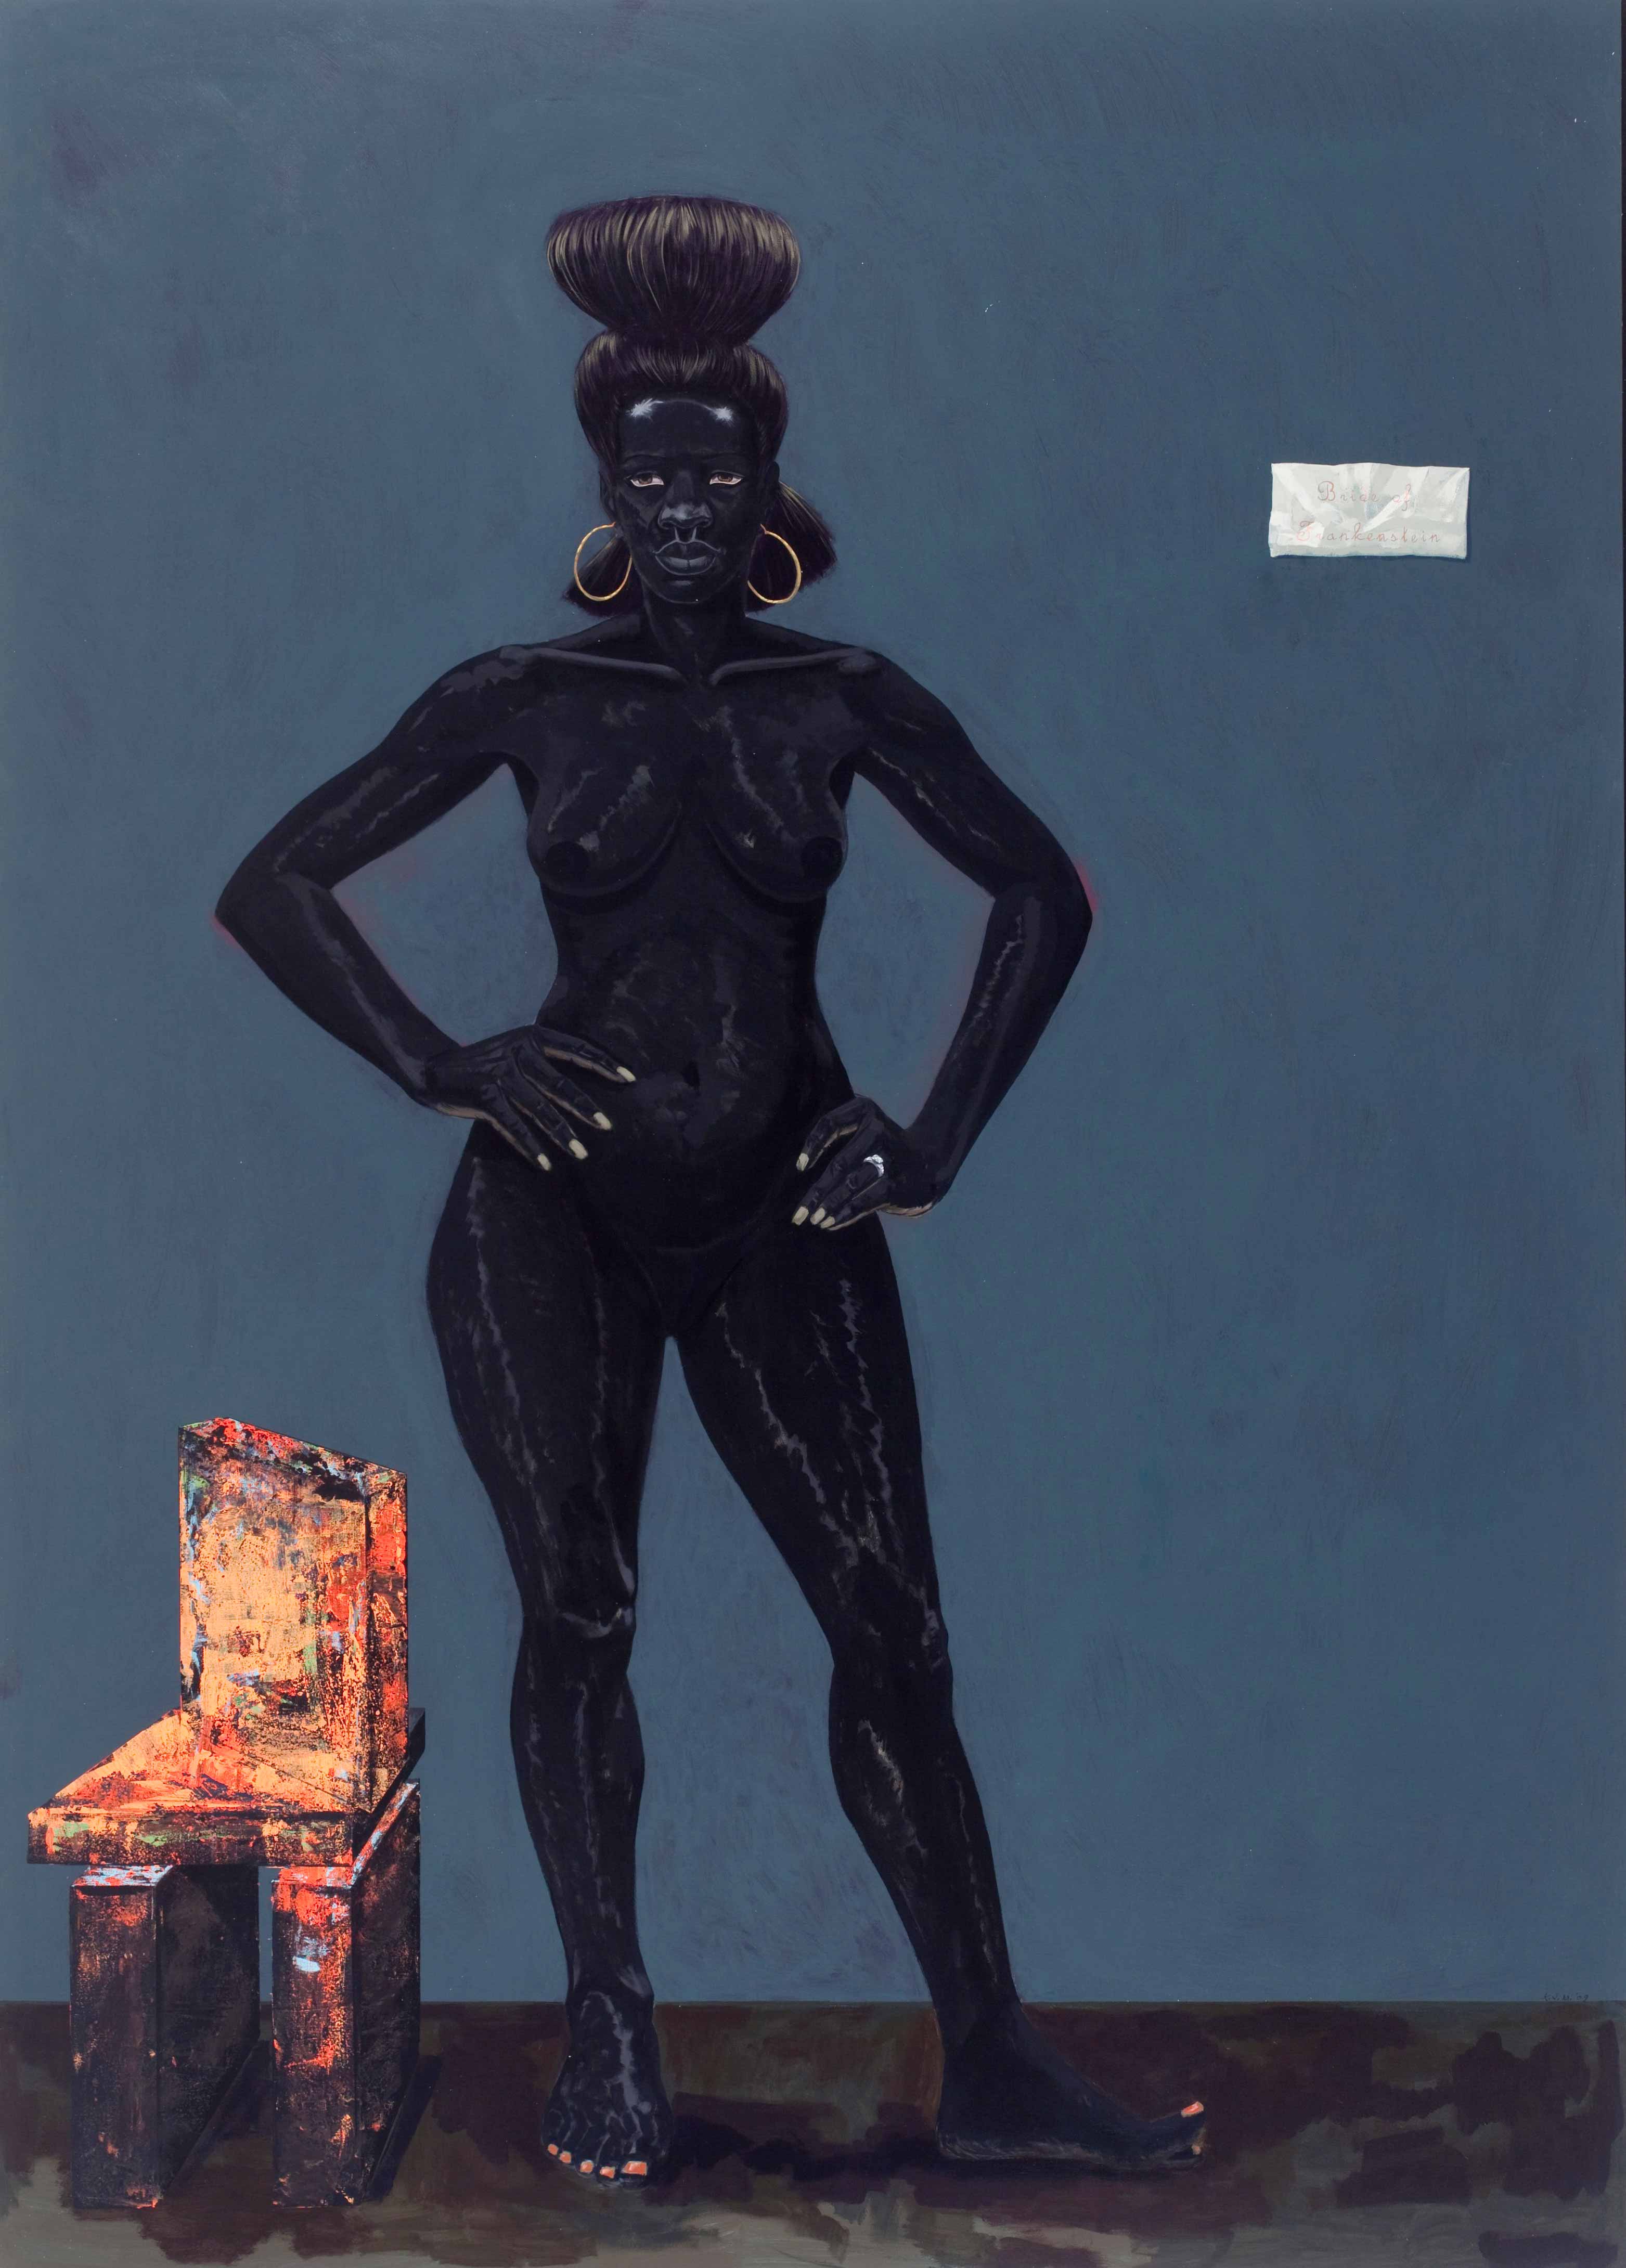 Kerry James Marshall, <em>Bride of Frankenstein</em>, 2009 
                      <em>A monumental woman who stirs up notions of black sexuality and the anxieties it has sometimes aroused in white culture </em> (Bride of Frankenstein, 2009: Kerry James Marshall, Collection David Zwirner, Courtesy the artist and Jack Shainman Gallery)